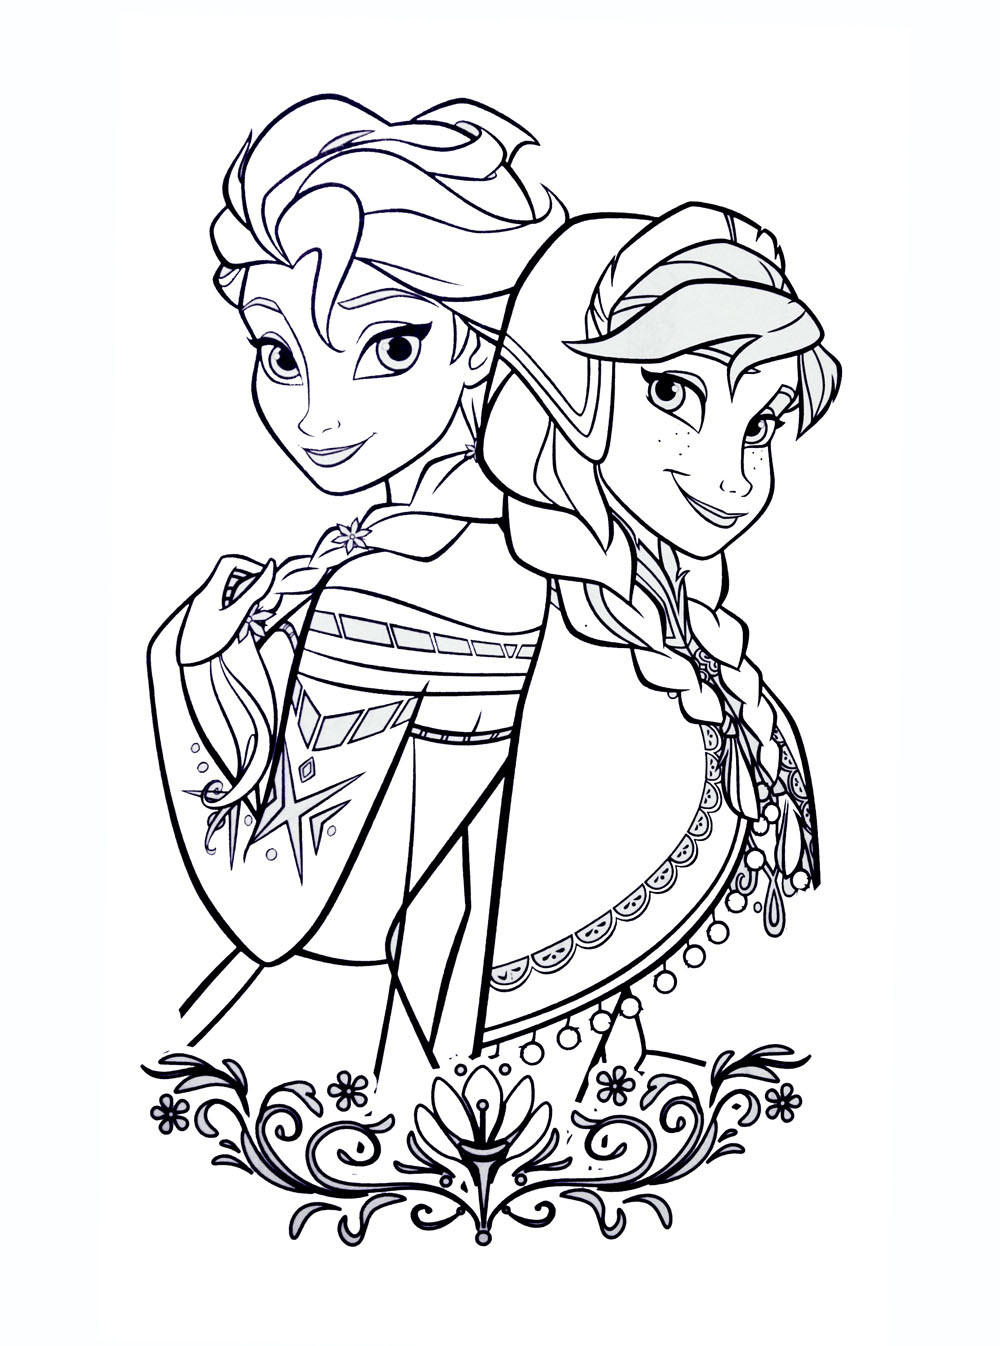 Kids Online Coloring Page
 Frozen free to color for kids Frozen Kids Coloring Pages